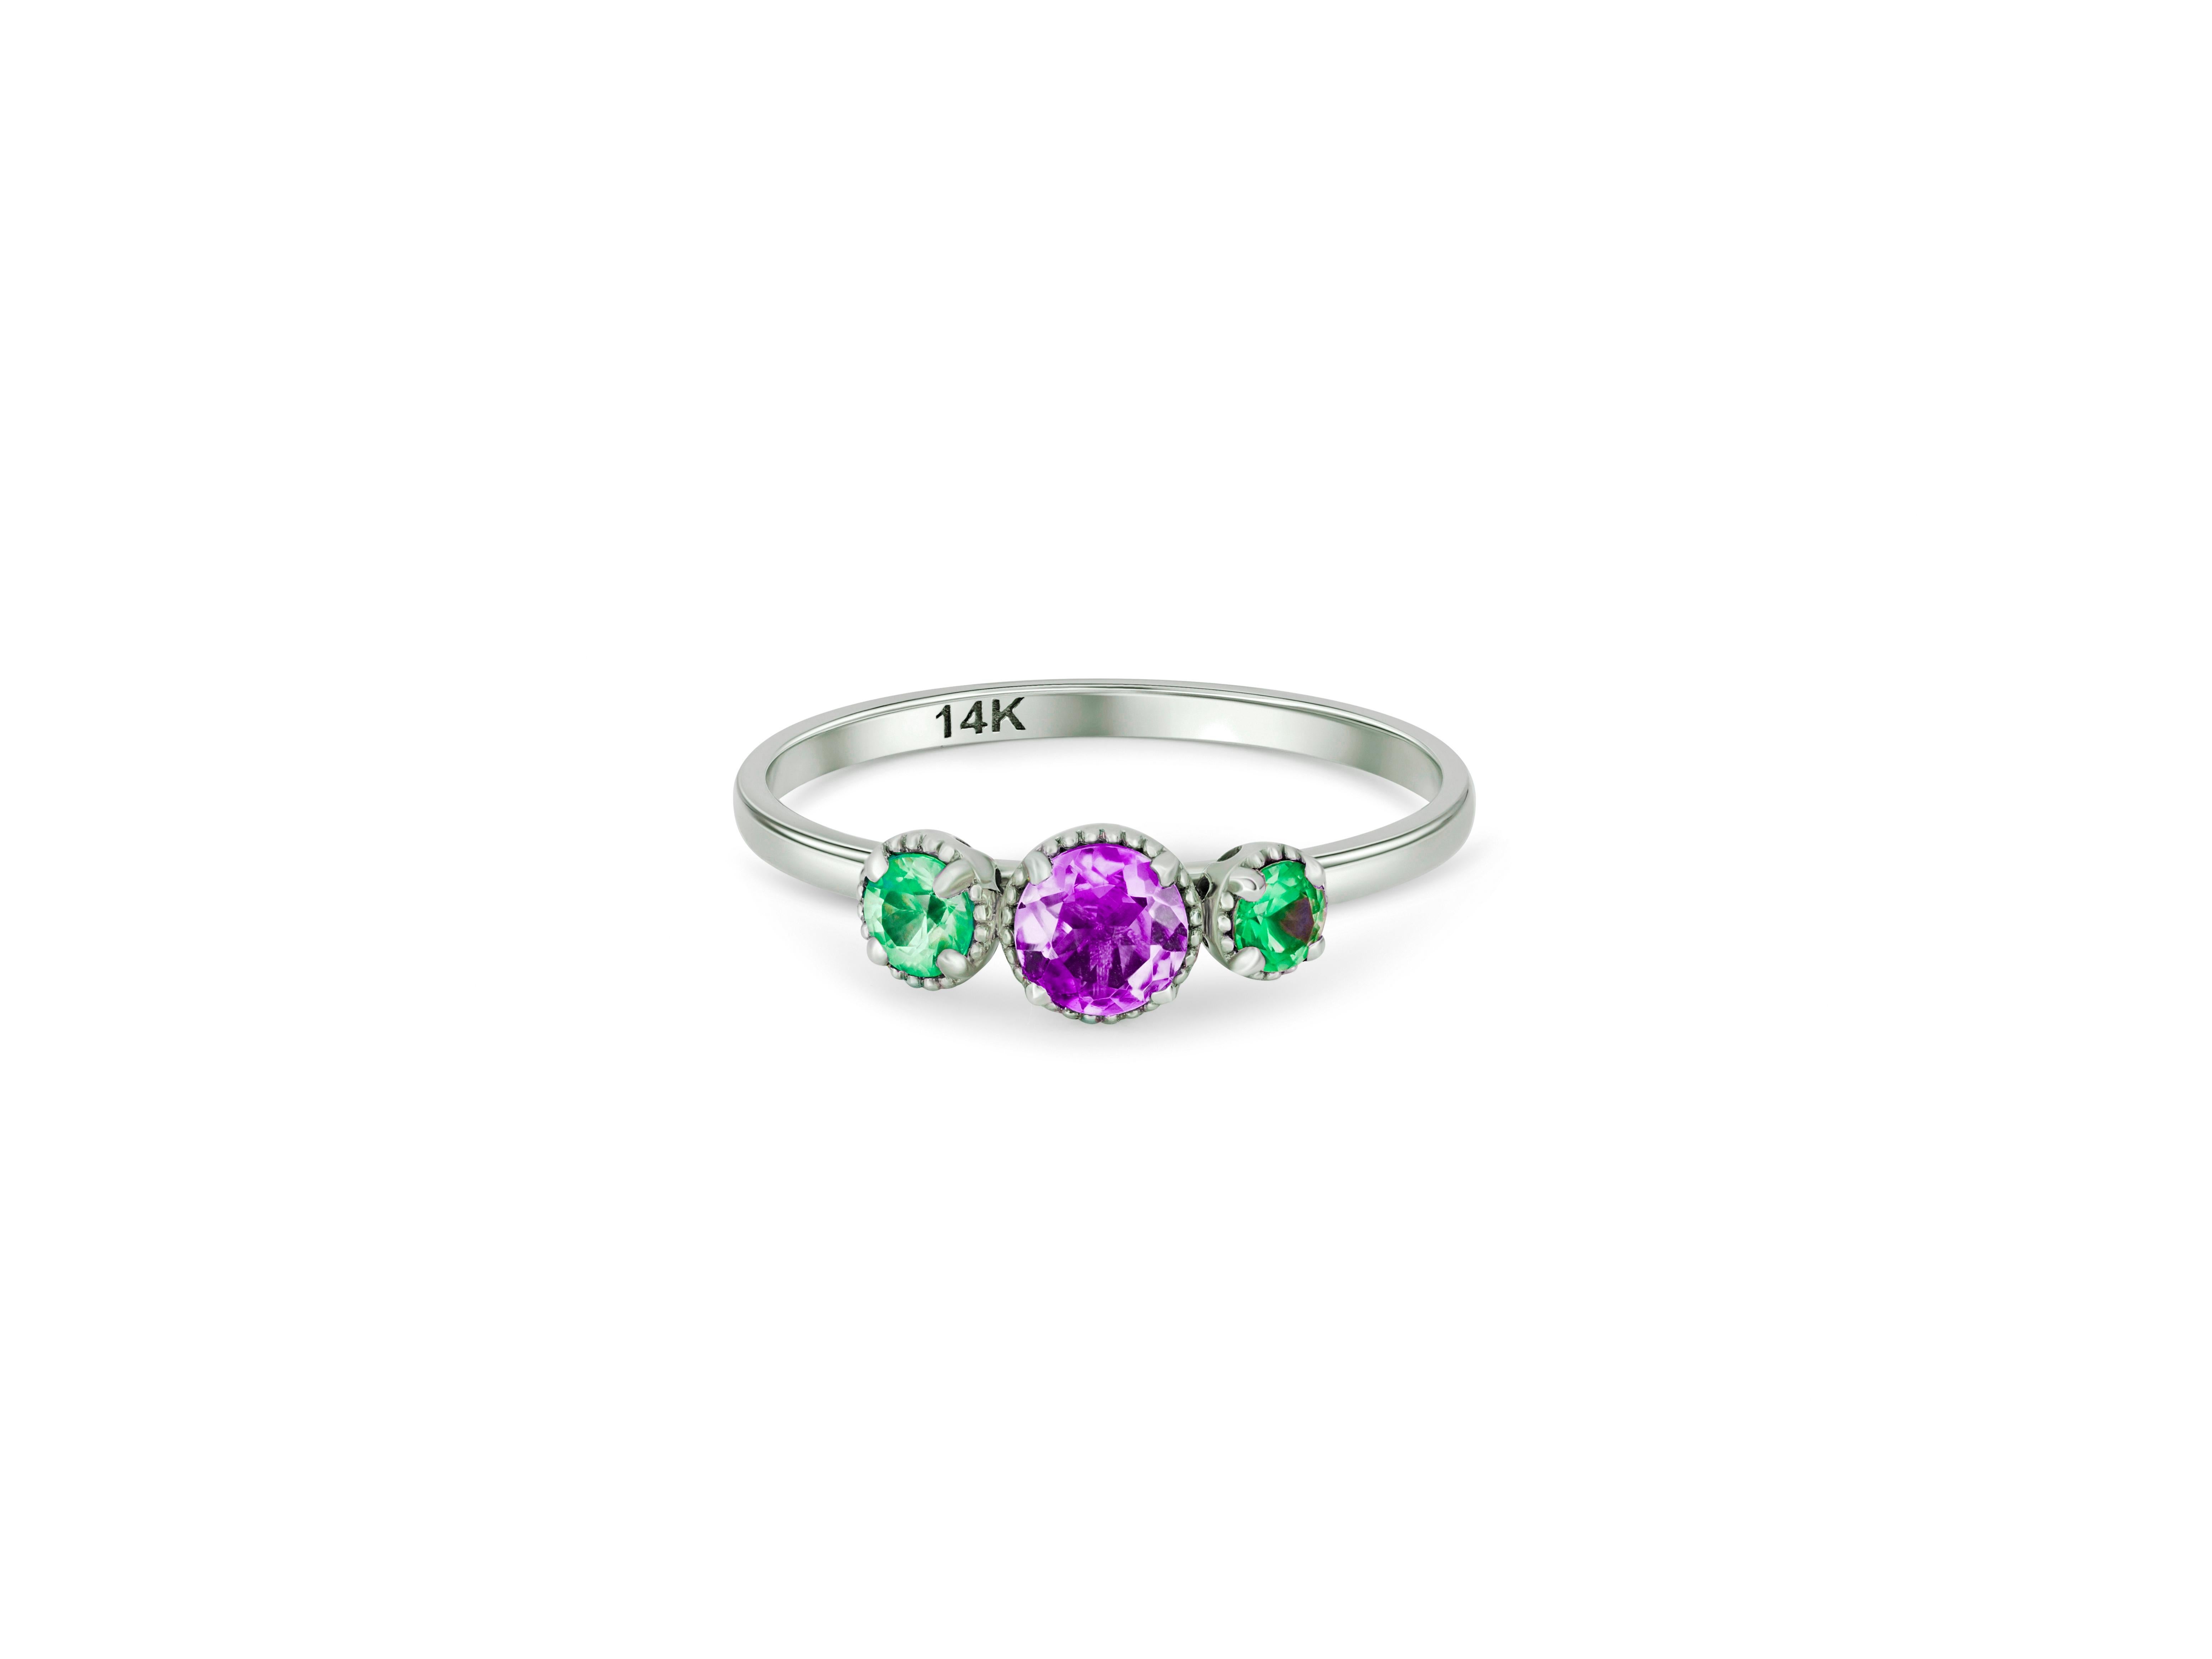 For Sale:  Green and purple gem 14k gold ring. 2